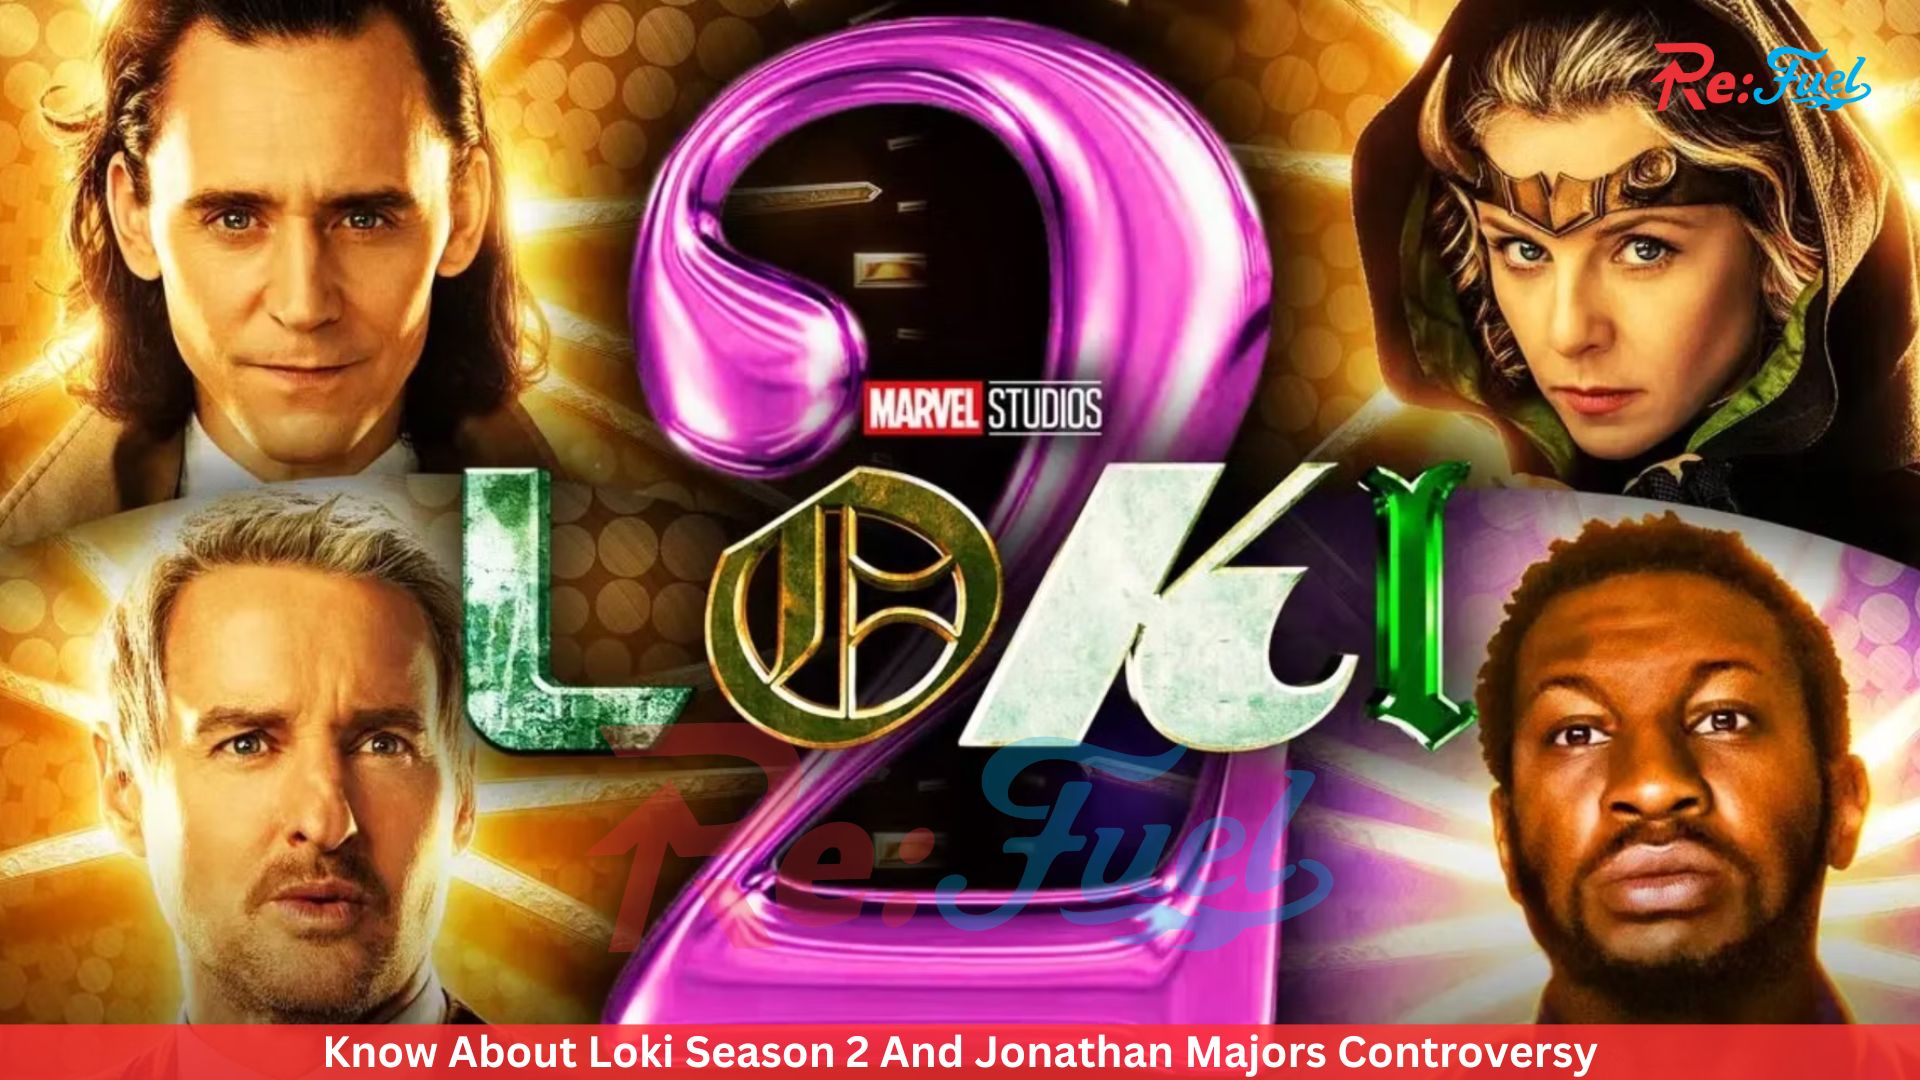 Know About Loki Season 2 And Jonathan Majors Controversy